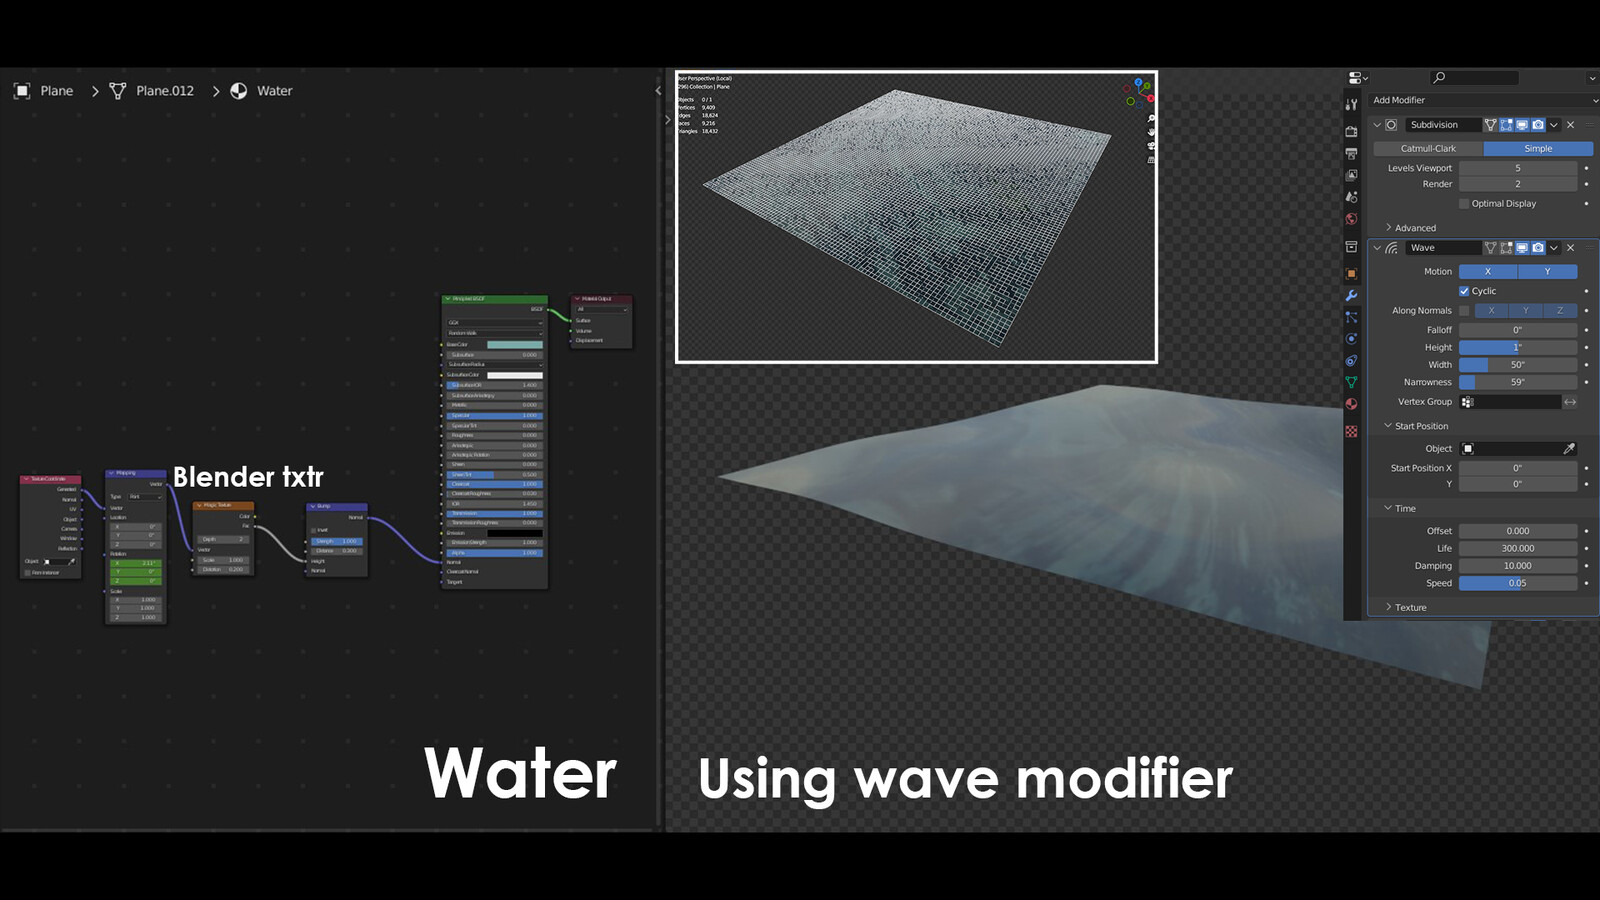 The water was kept simple. Initially I though about simulating water in Blender with Flip Fluid add-on but it wasn't efficient enough and was abit distracting from the focus. Which is was logo. So I used a plane, wave mod with a Blender txtr animated. 